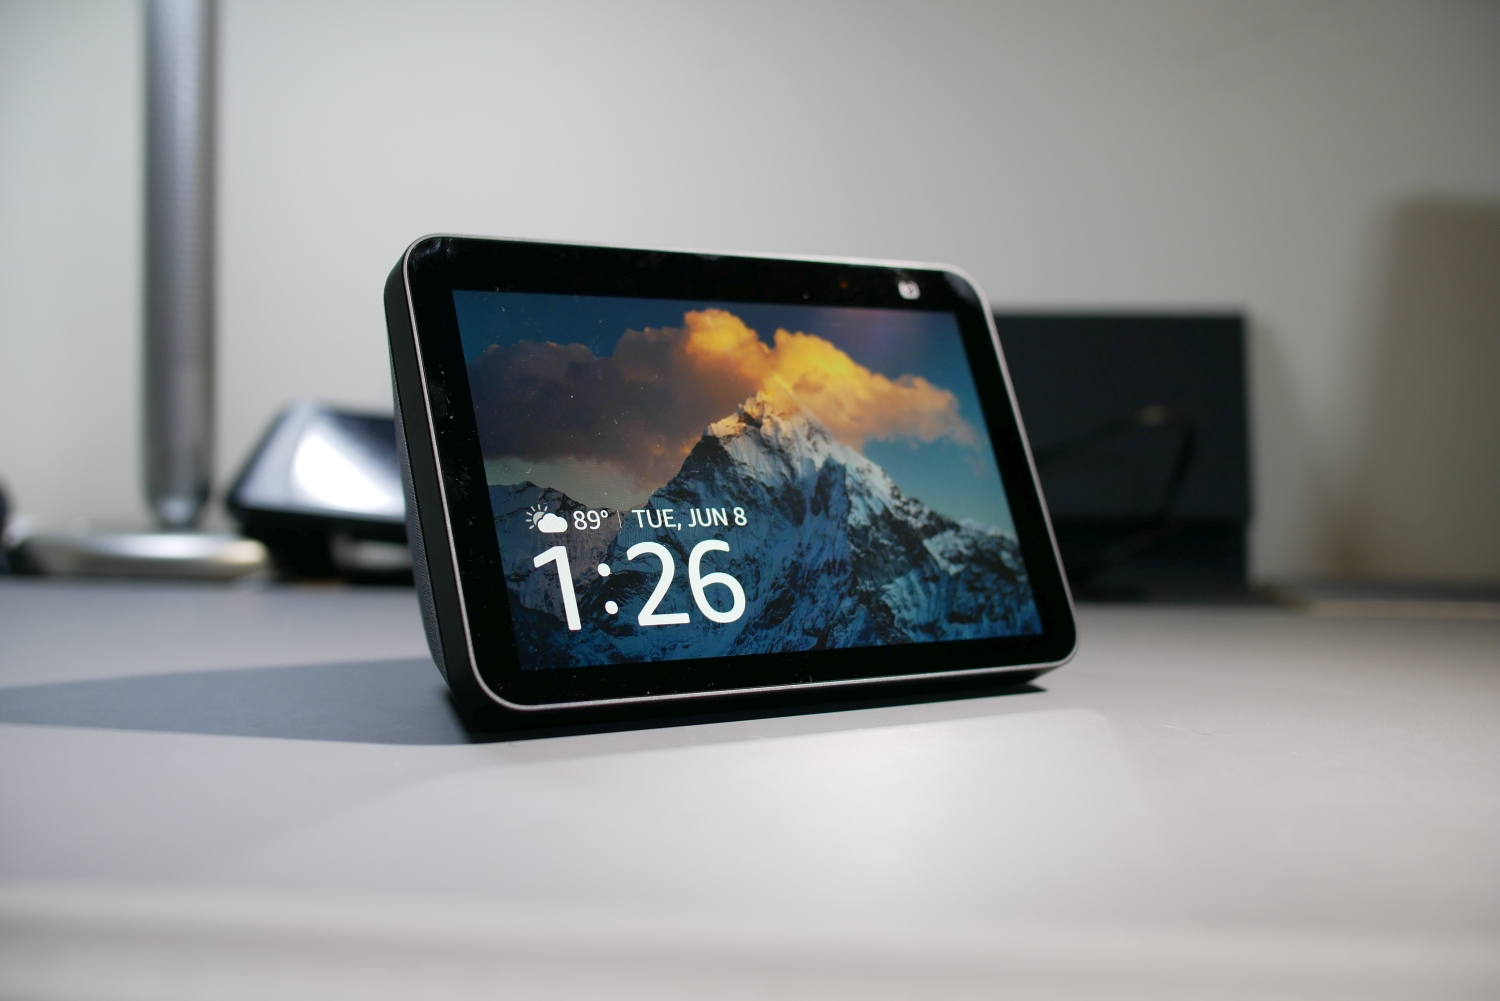 The 2021 Amazon Echo Show 8 in an angled view.